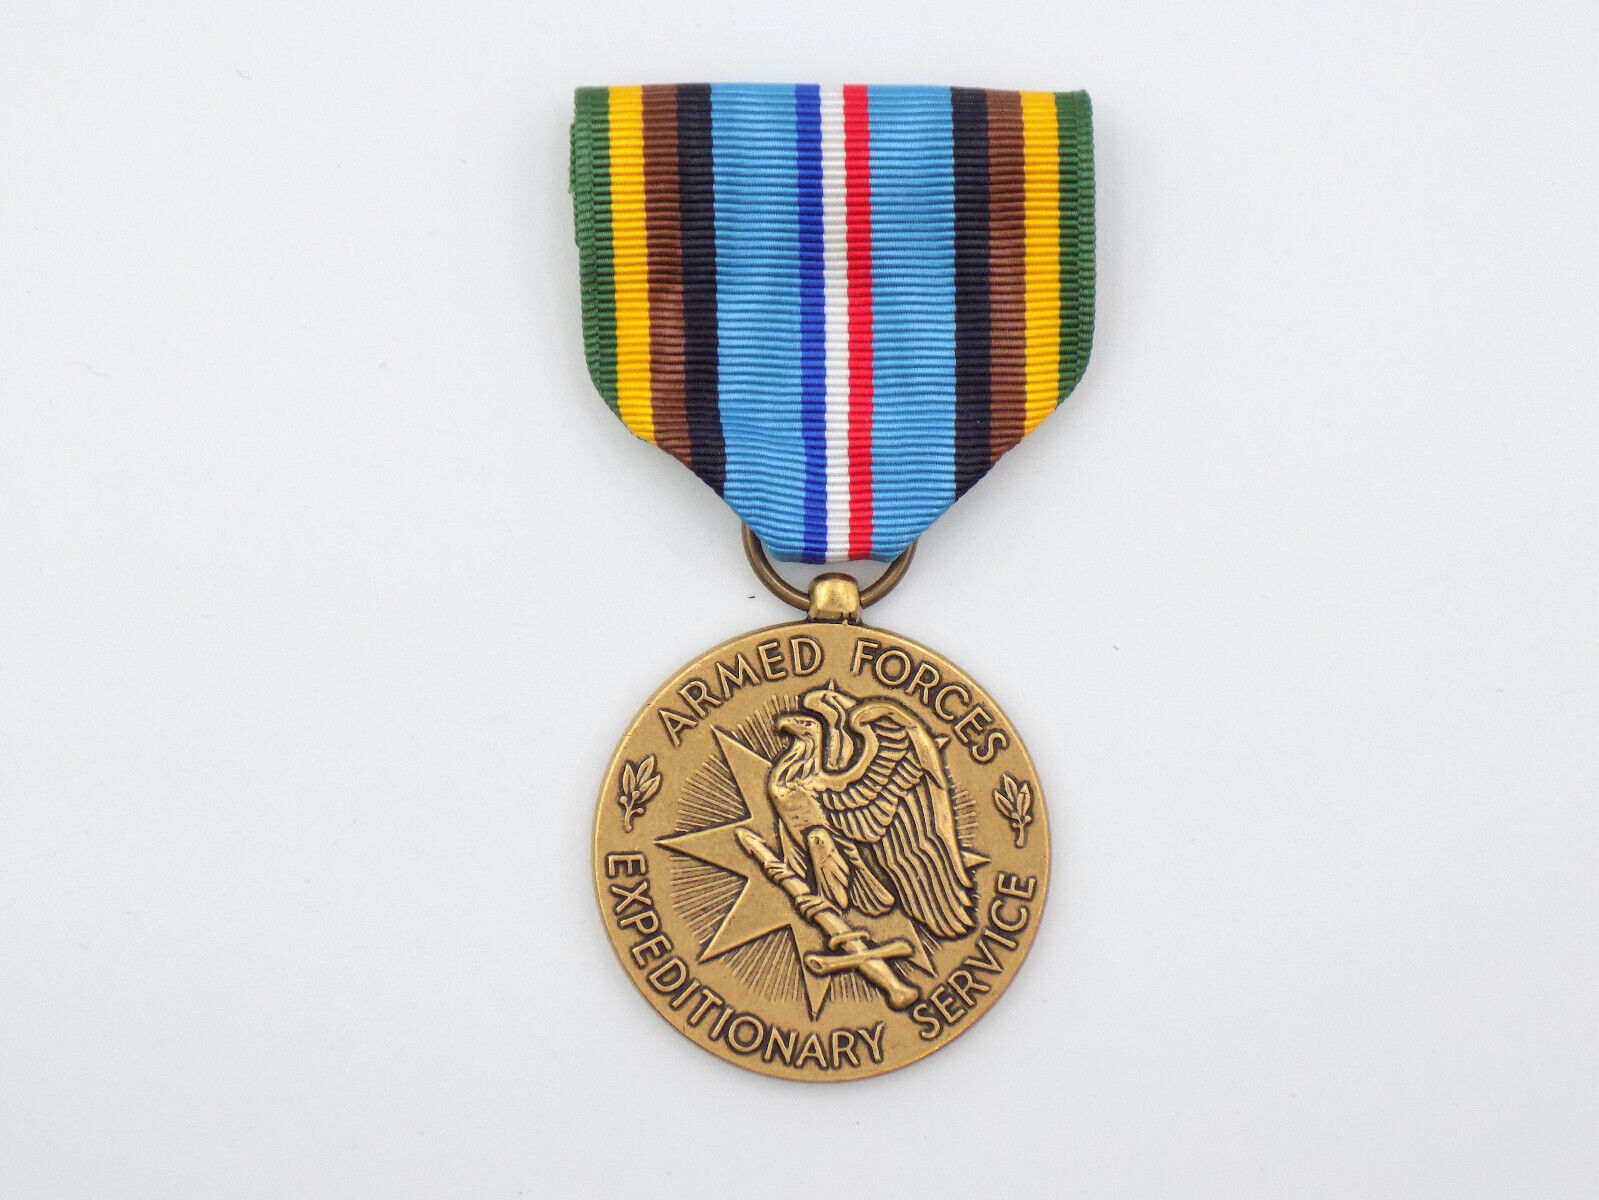 Original US Armed Forces Expeditionary Service Medal